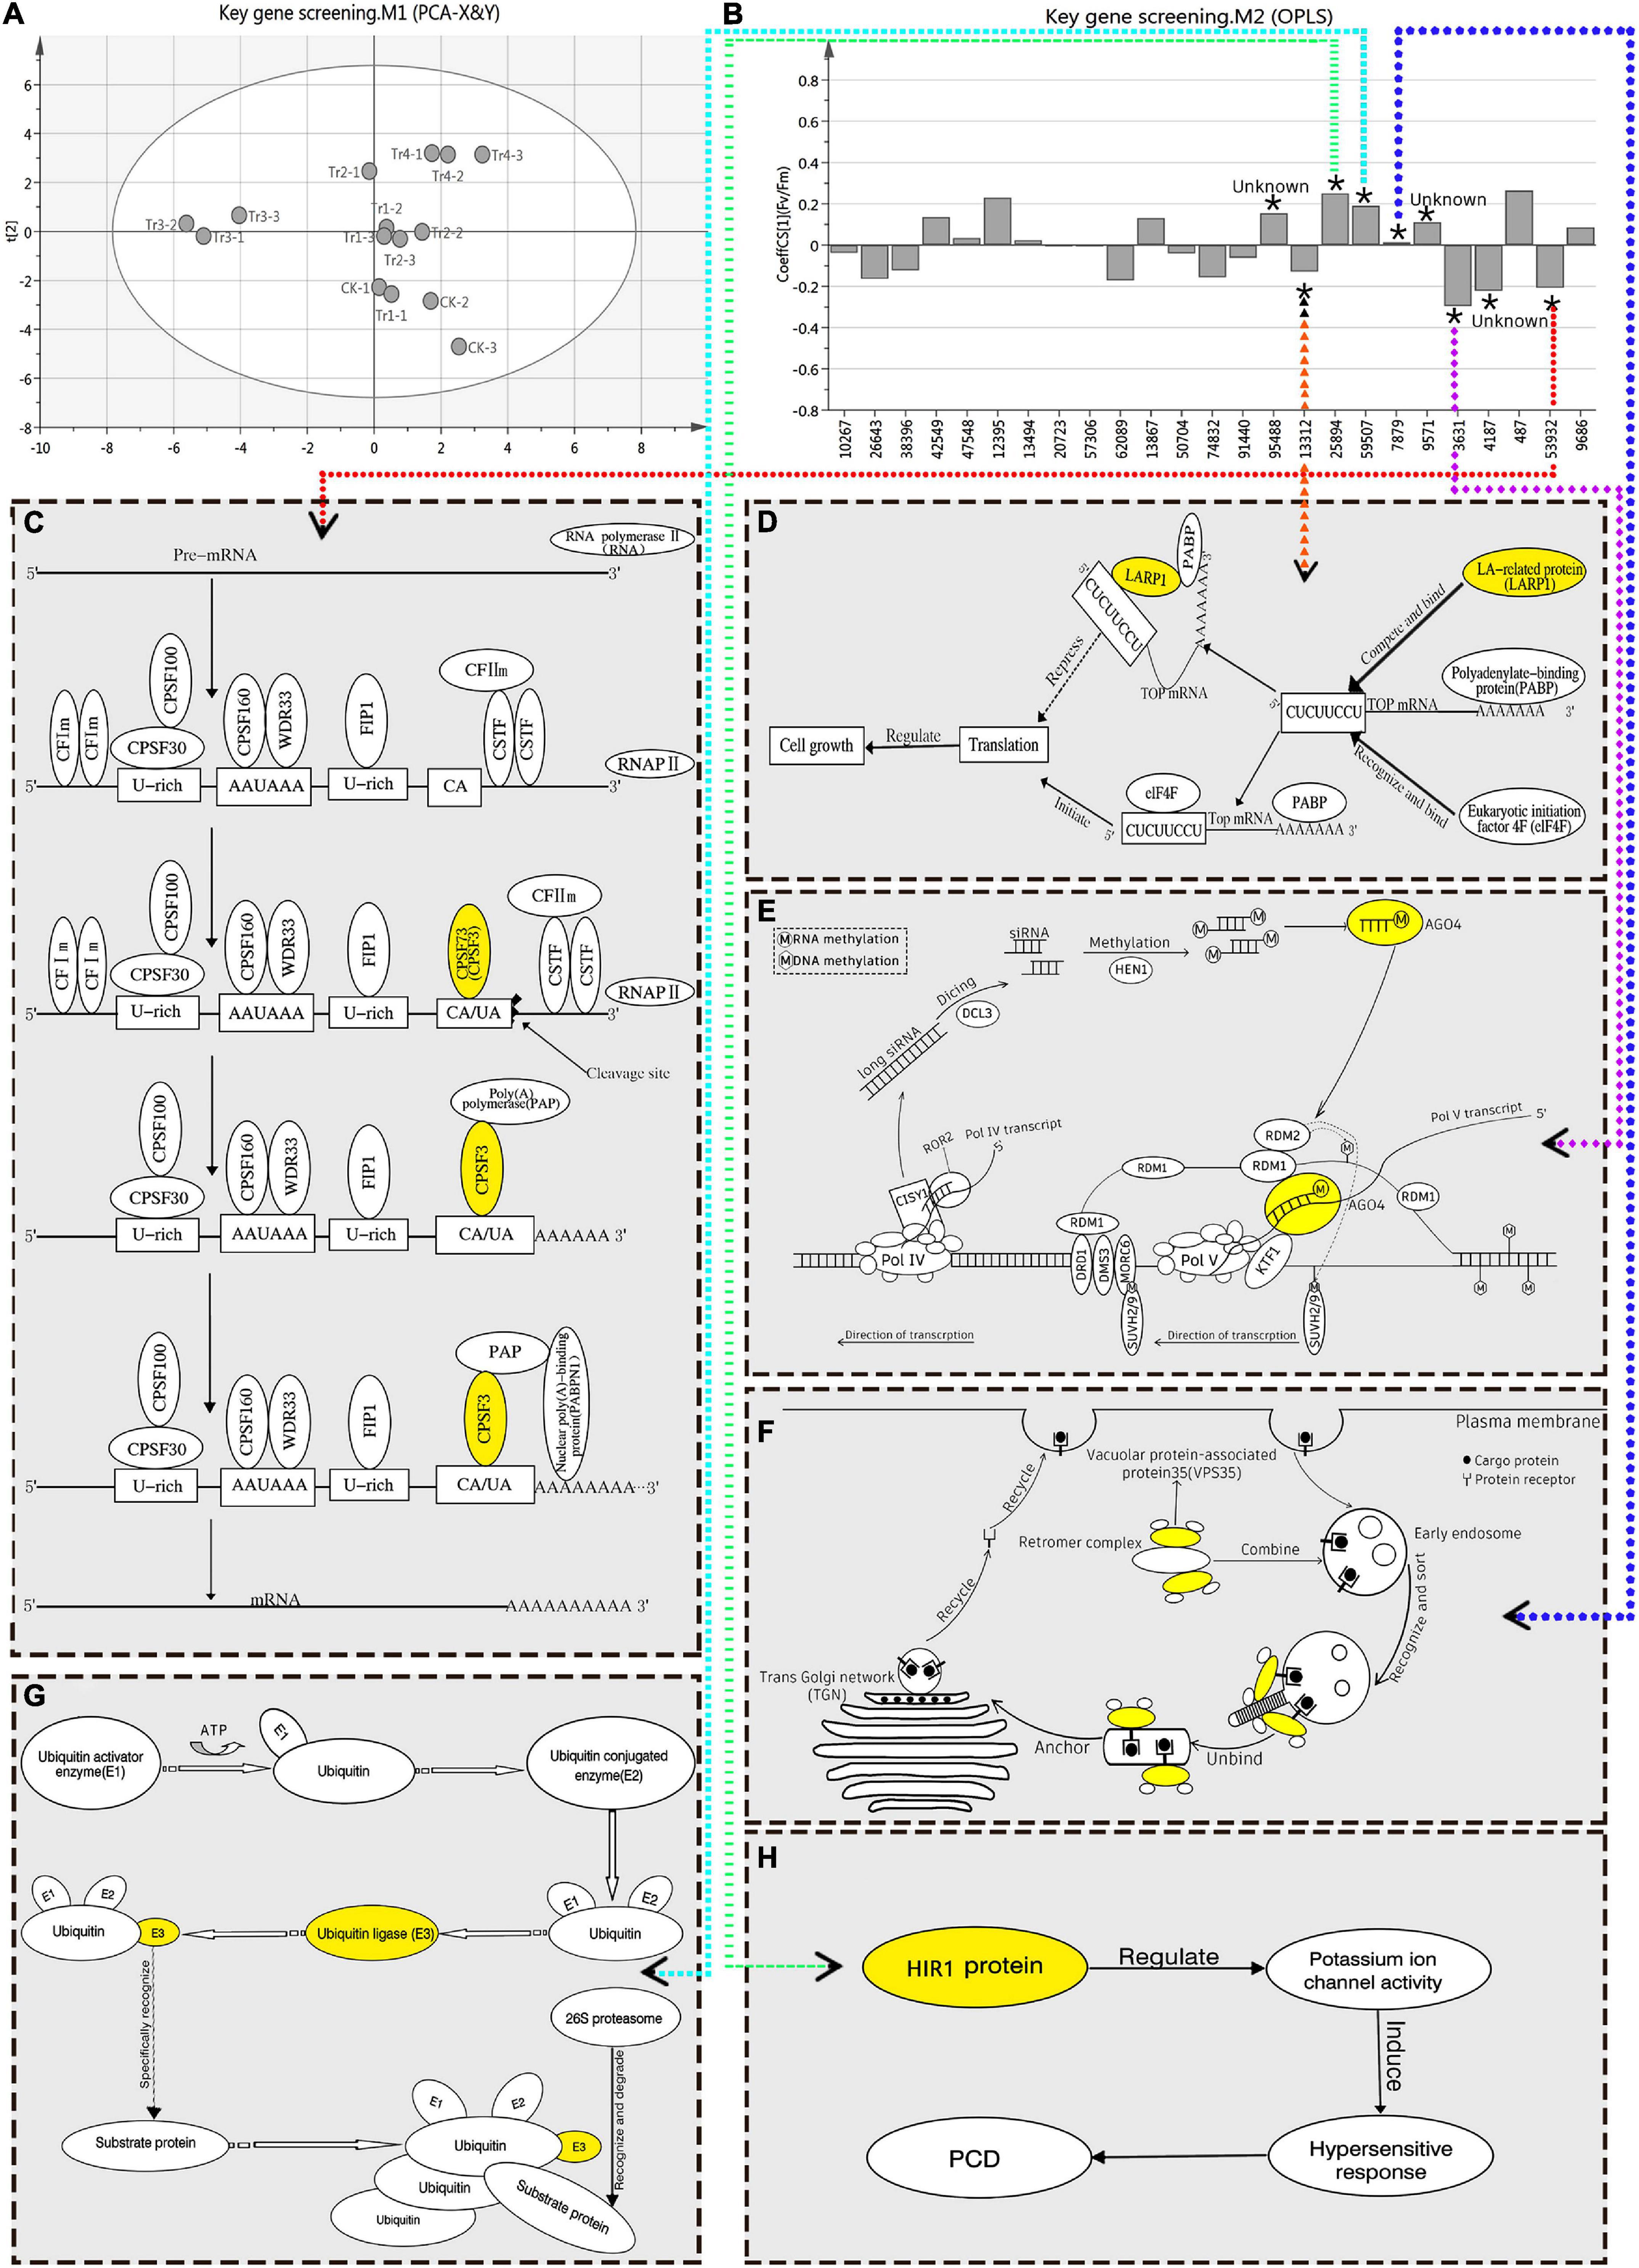 Frontiers | Integrated Analyses of Transcriptome and Chlorophyll 